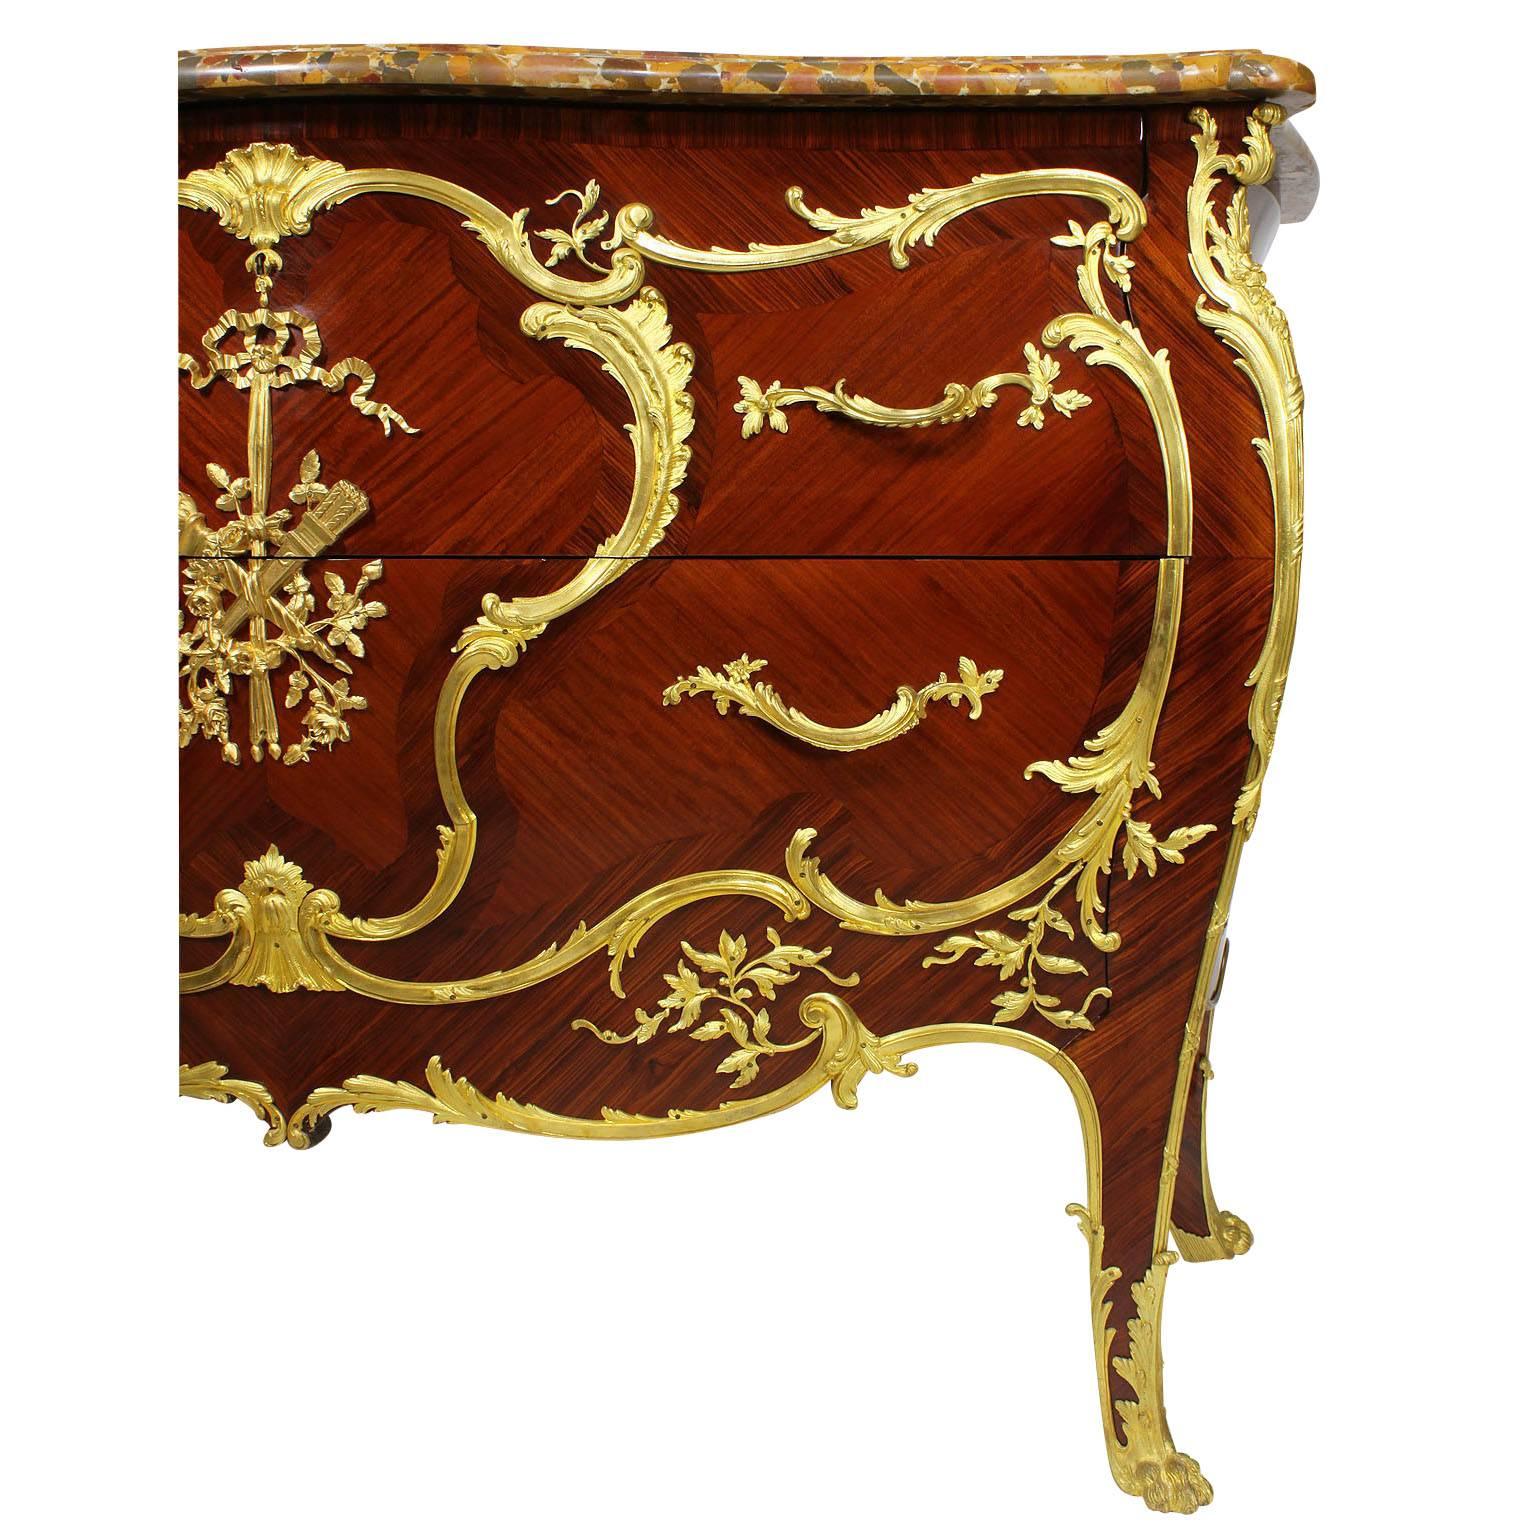 Belle Époque French 19th-20th Century Louis XV Style Ormolu-Mounted Commode For Sale